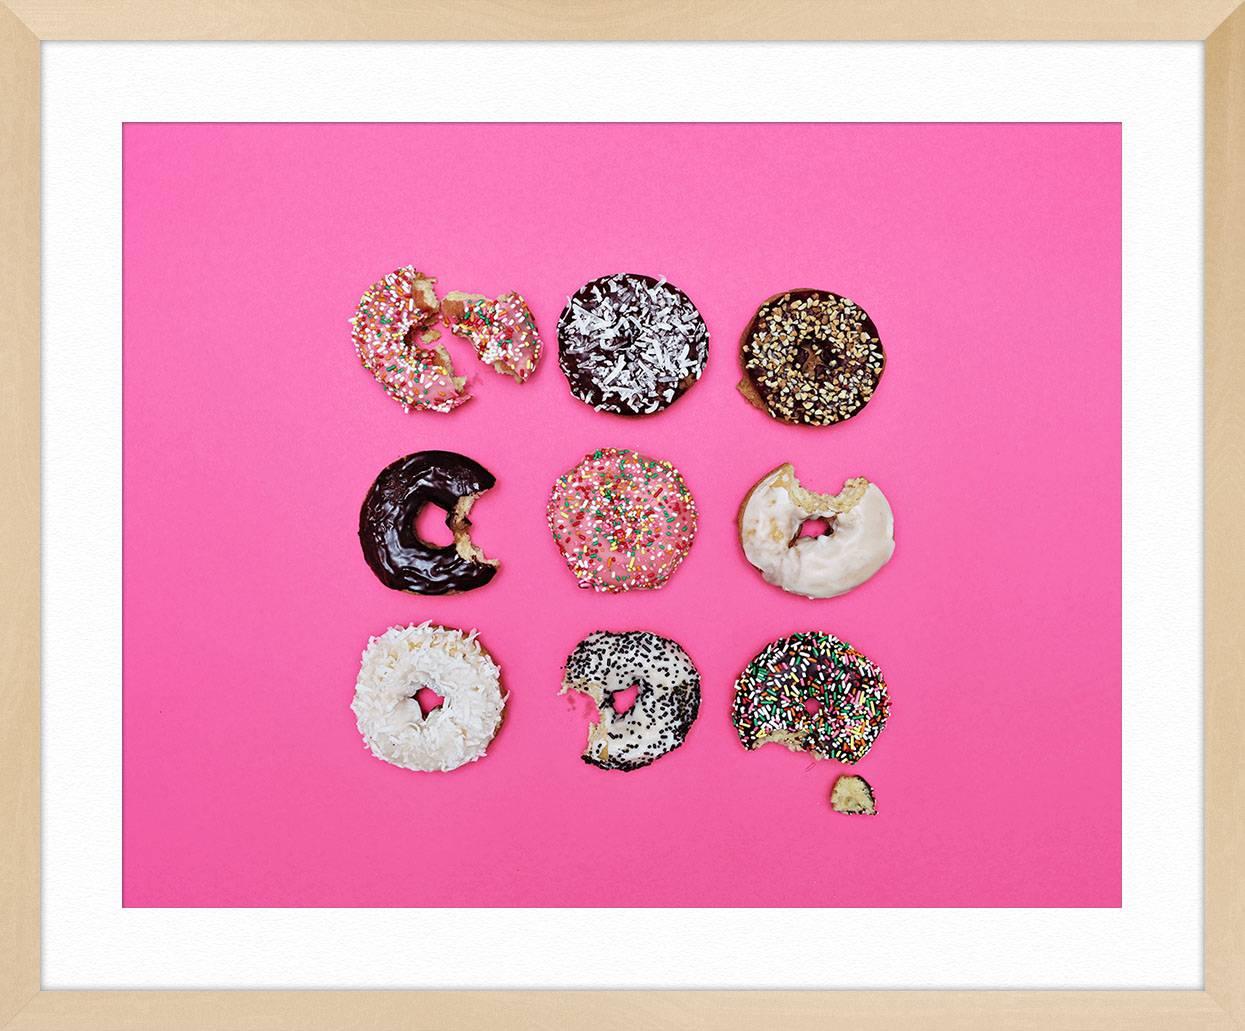 Chocolate for the Win! - Pink Still-Life Print by Kimberly Genevieve